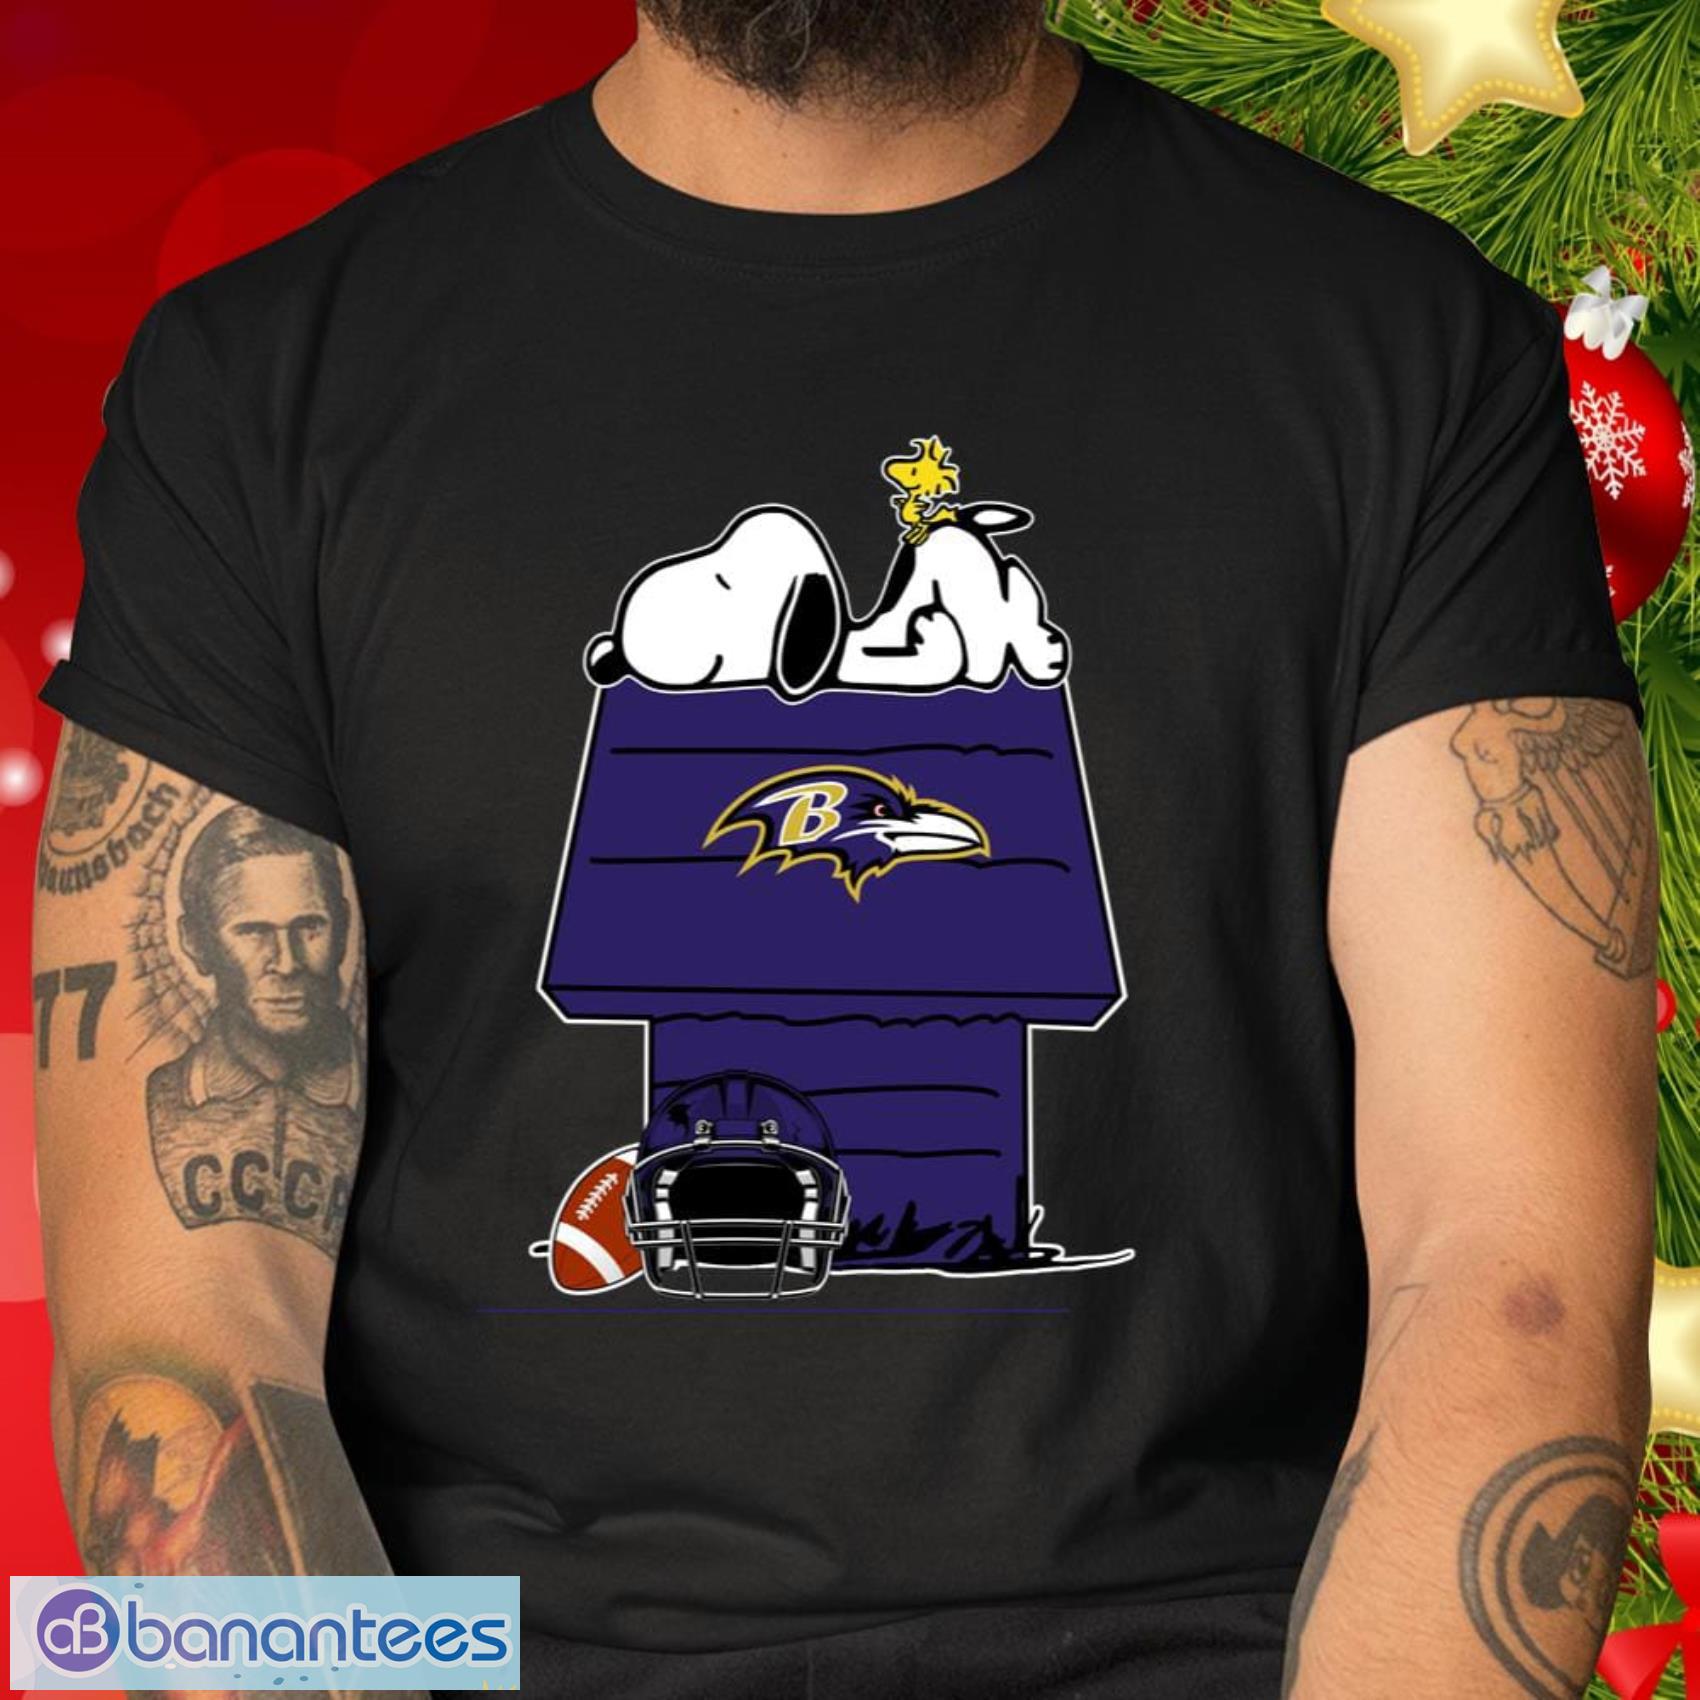 Baltimore Ravens NFL Football Gift Fr Fans Snoopy Woodstock The Peanuts Movie T Shirt - Baltimore Ravens NFL Football Snoopy Woodstock The Peanuts Movie T Shirt_2